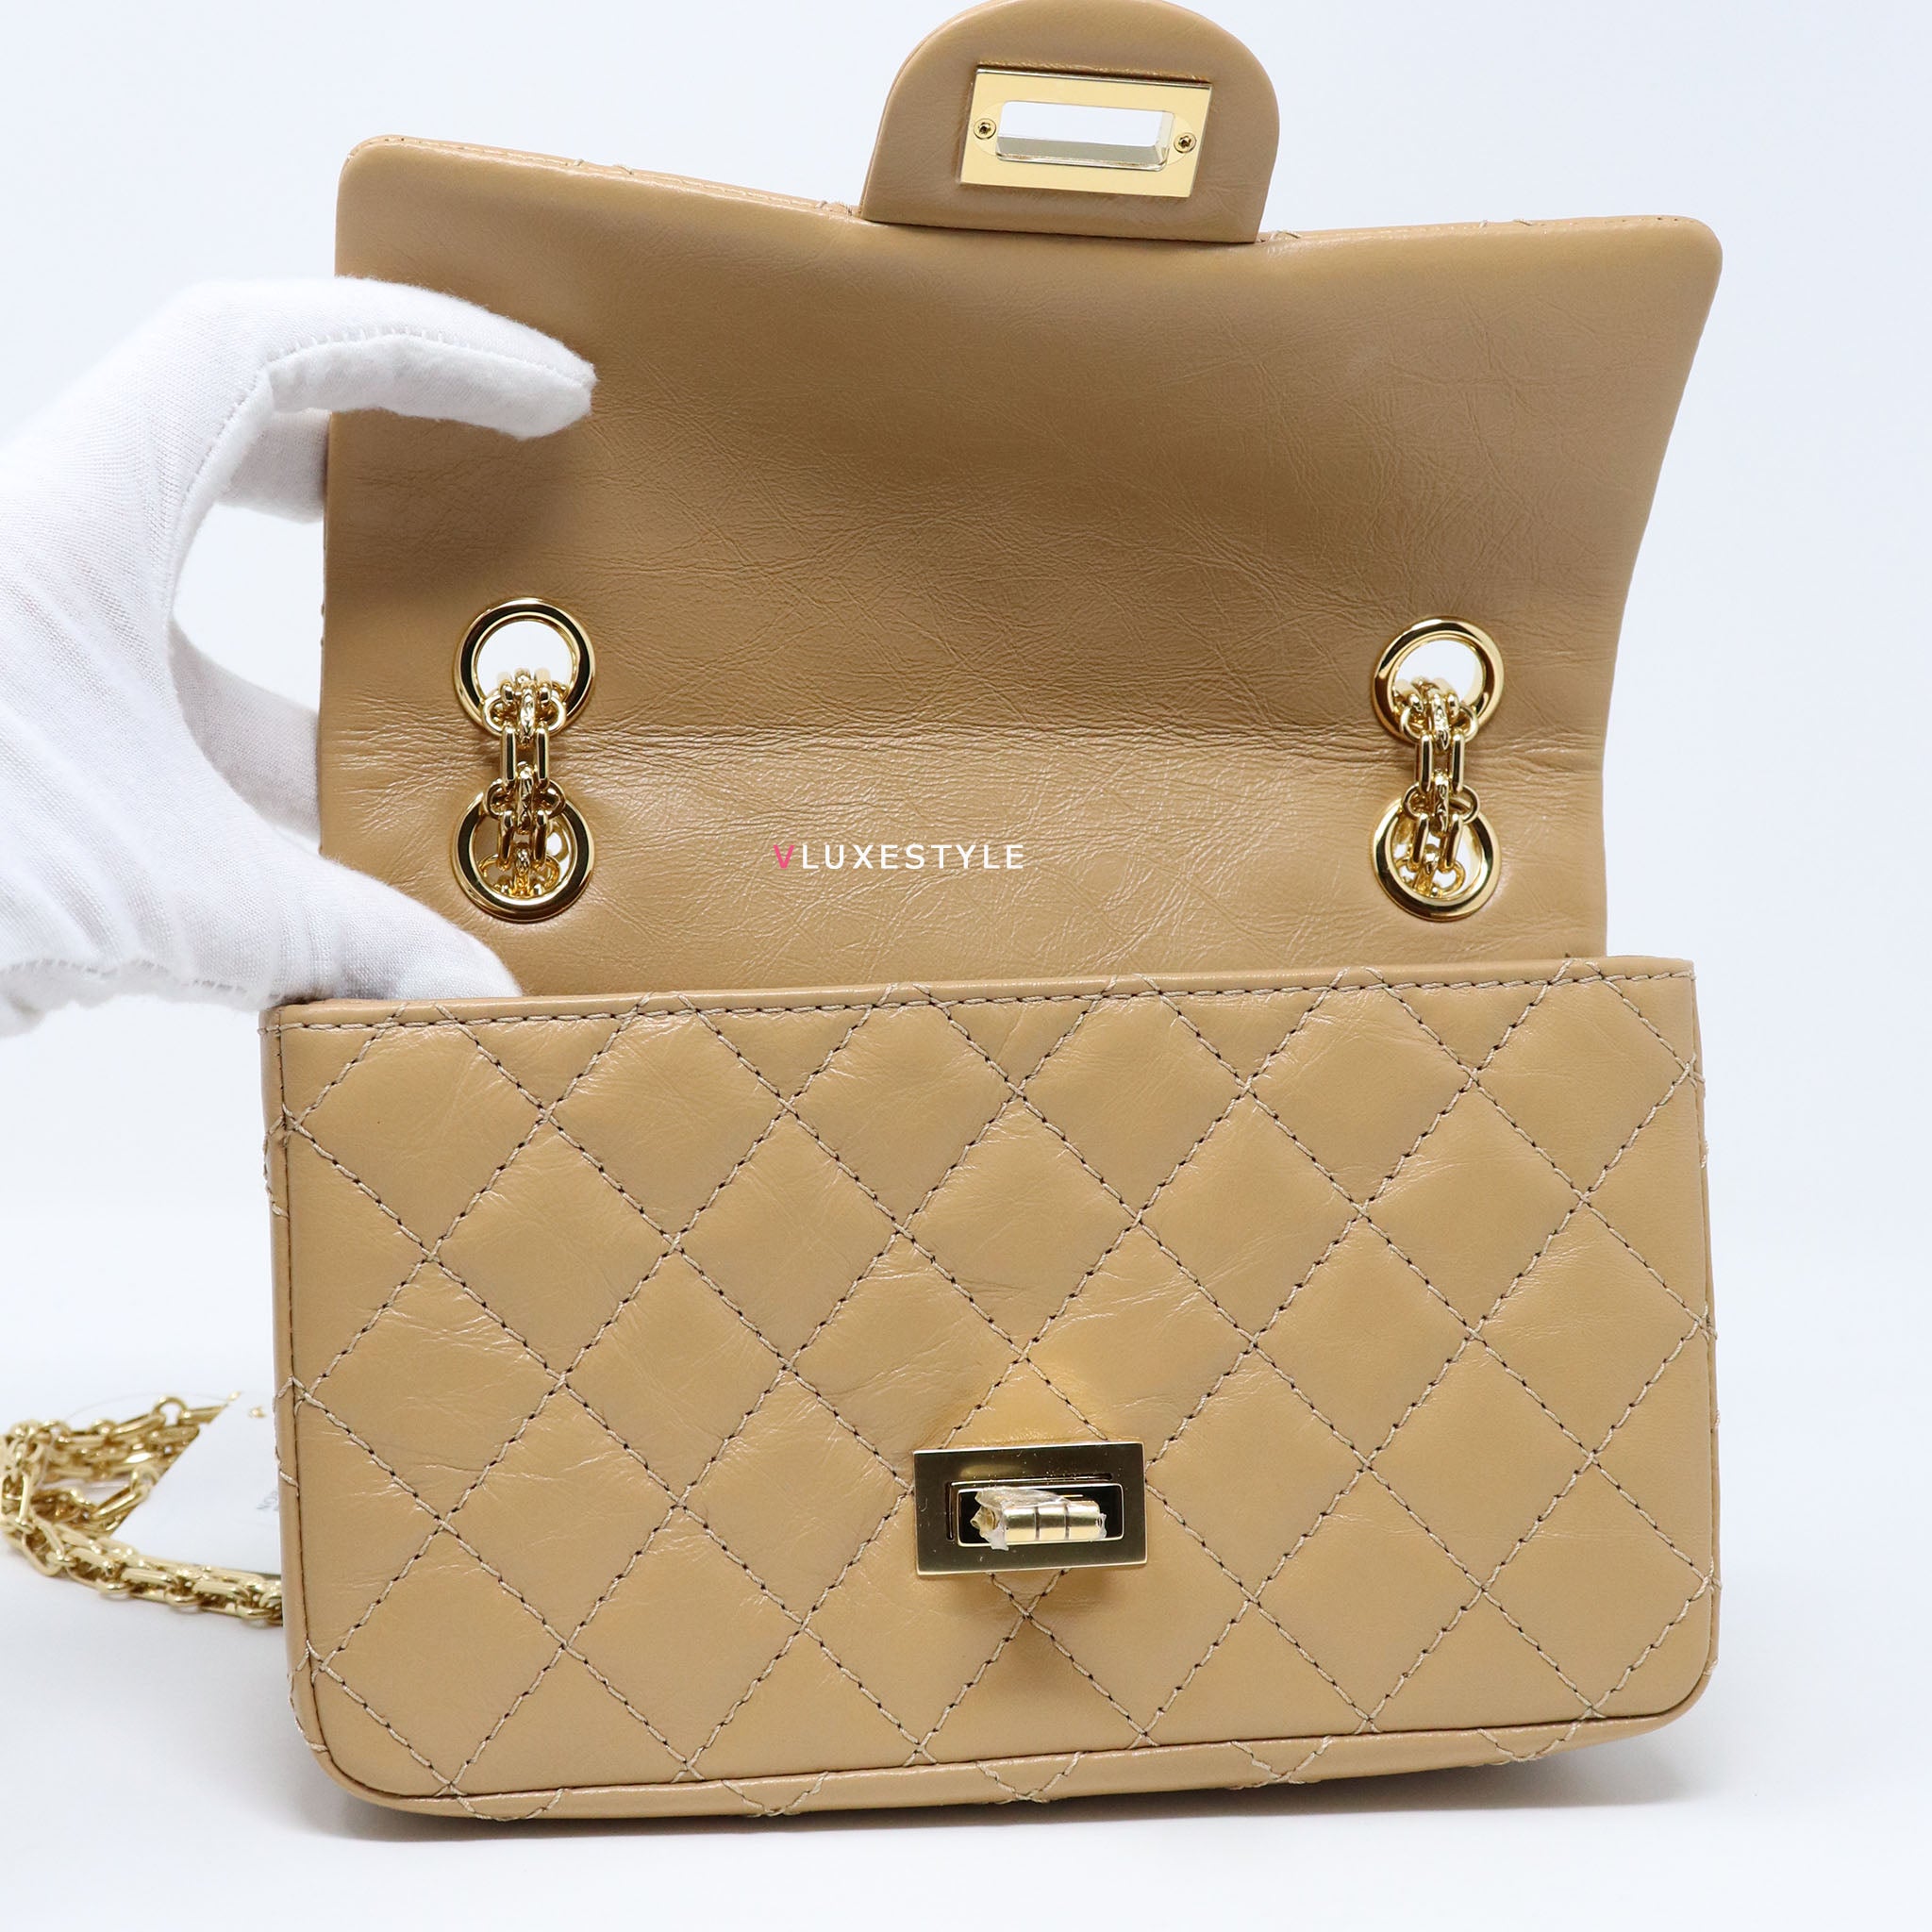 Chanel 19A Mini Reissue Beige Quilted Aged Calfskin with shiny gold hardware